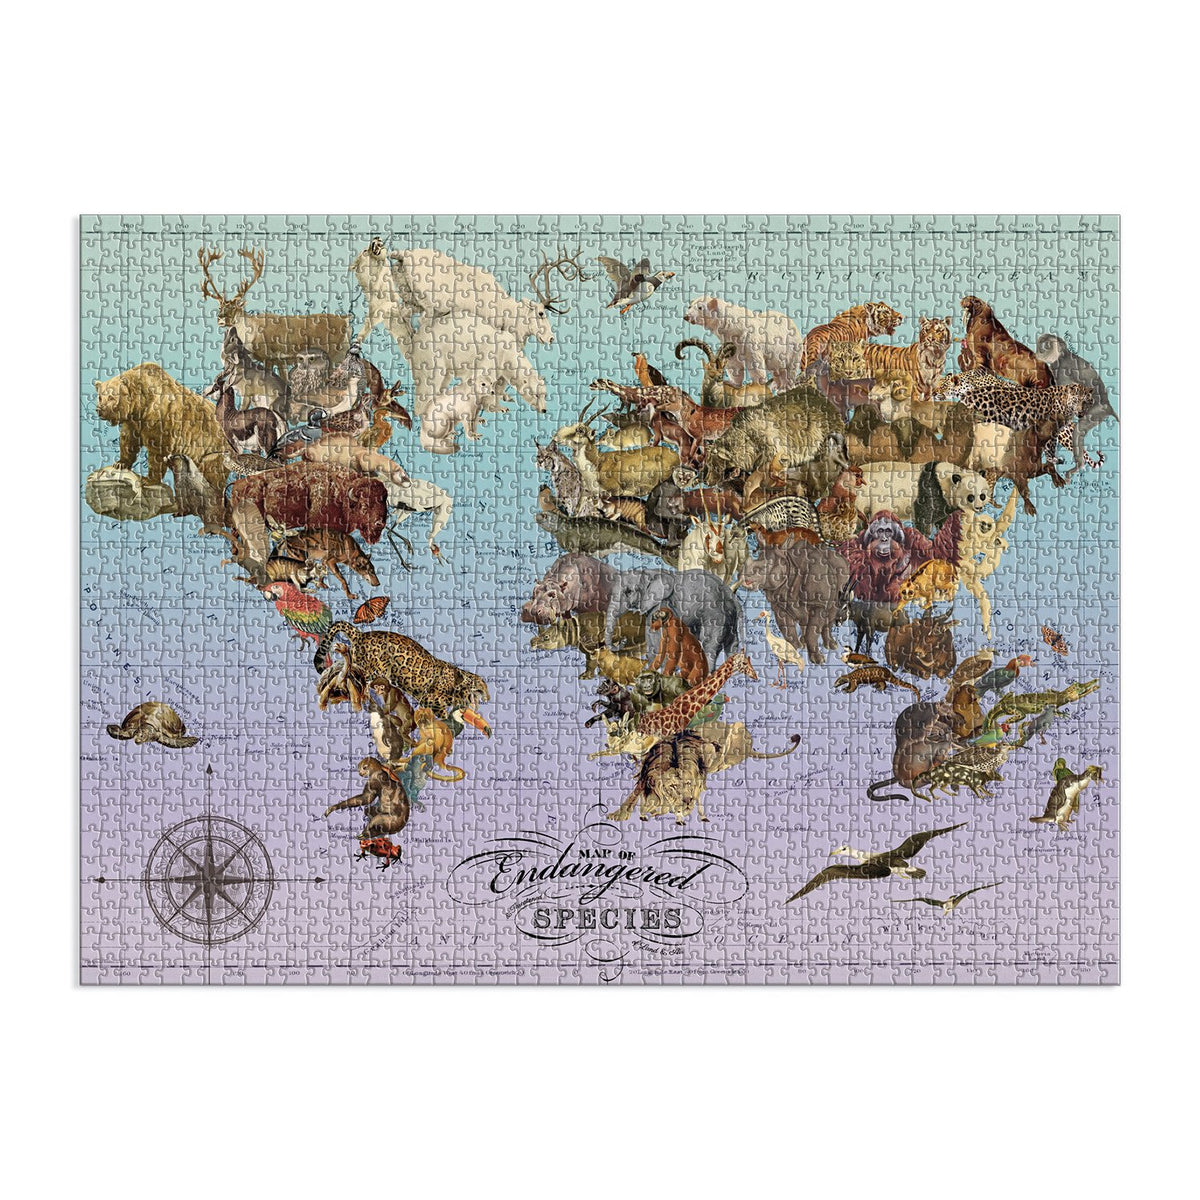 Wendy Gold Endangered Species 1500 Piece Jigsaw Puzzle 1500 Piece Puzzles Wendy Gold 